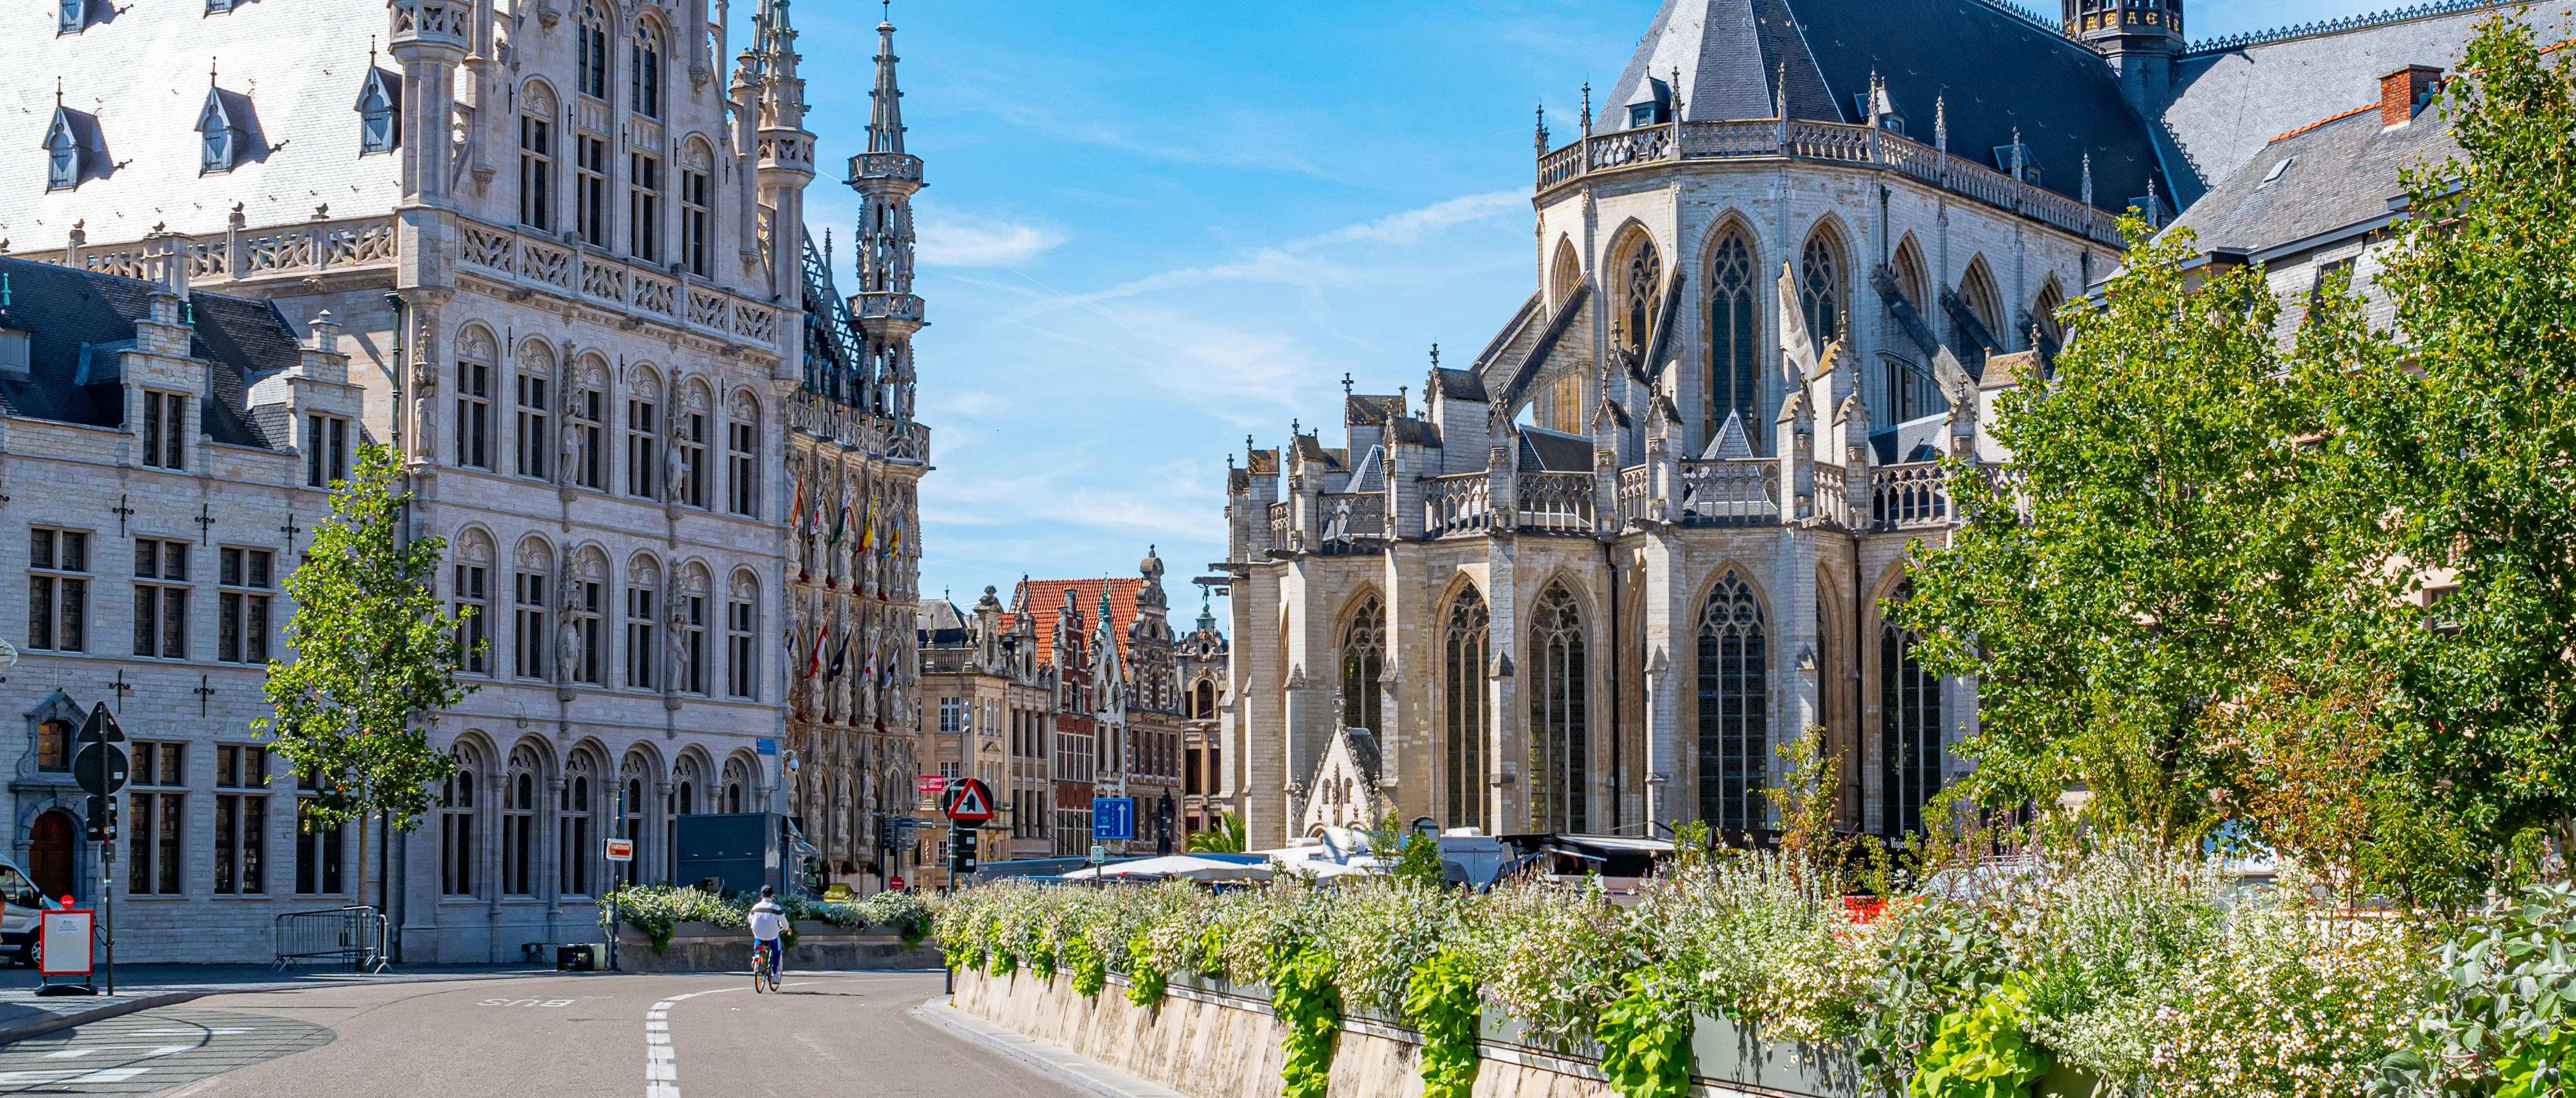 Self guided tour with interactive city game of Leuven Musement